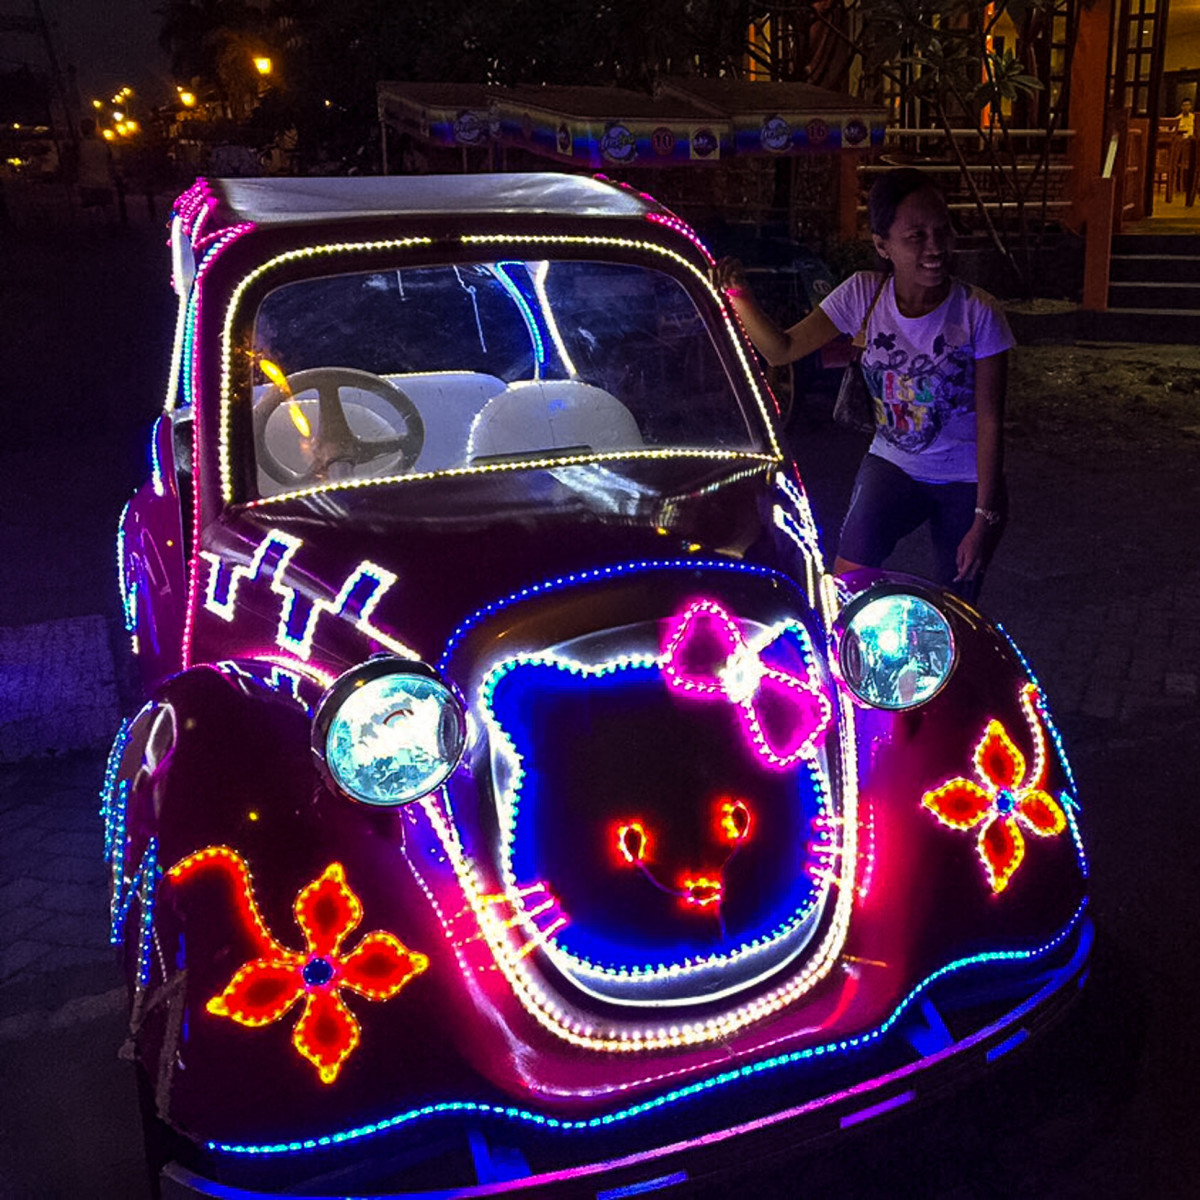 A nighttime festival on wheels in Singapore